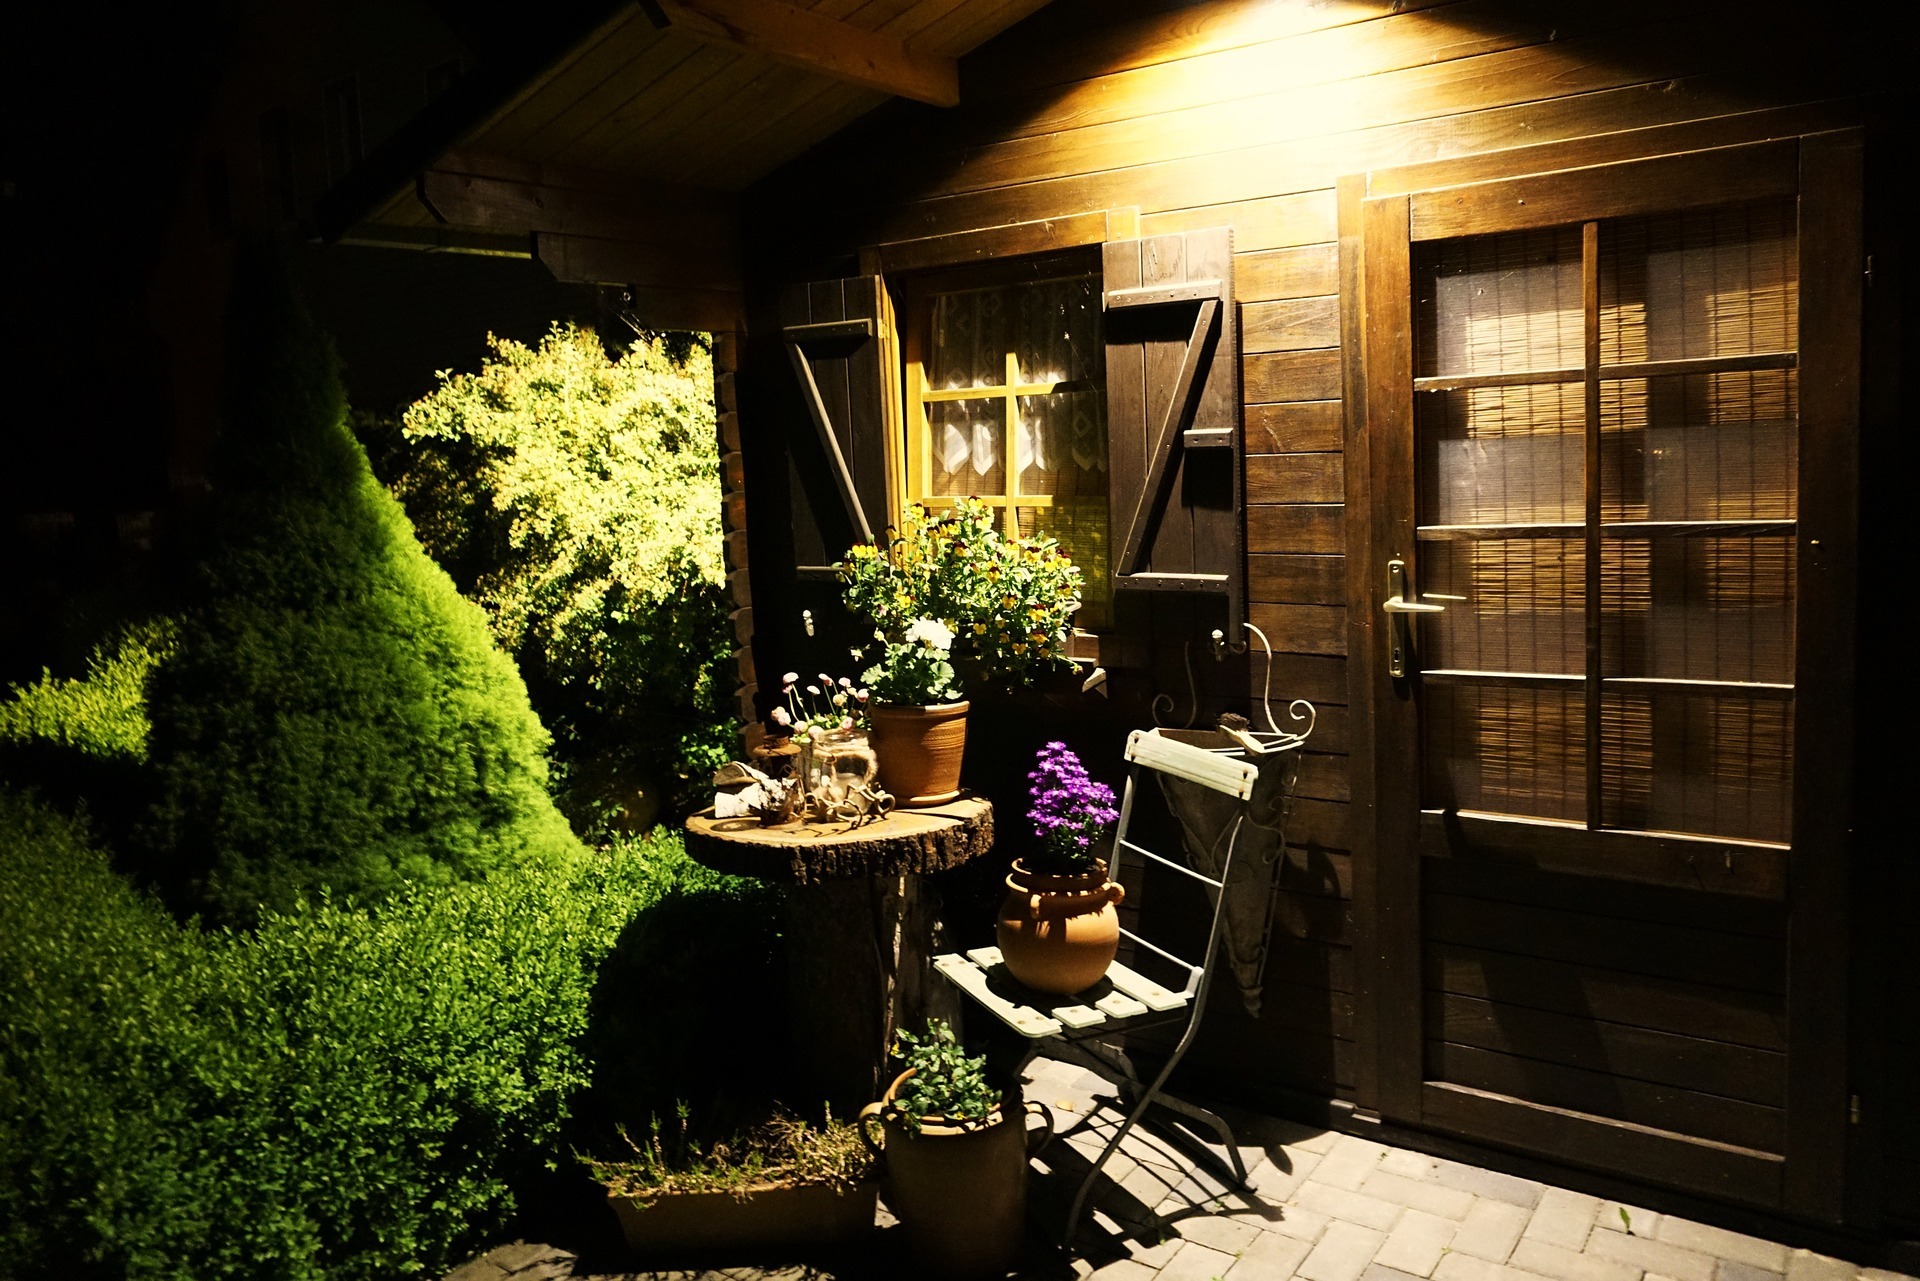 She Sheds at night with a yellow glowing porch light over a garden table and chair with potted plants on top